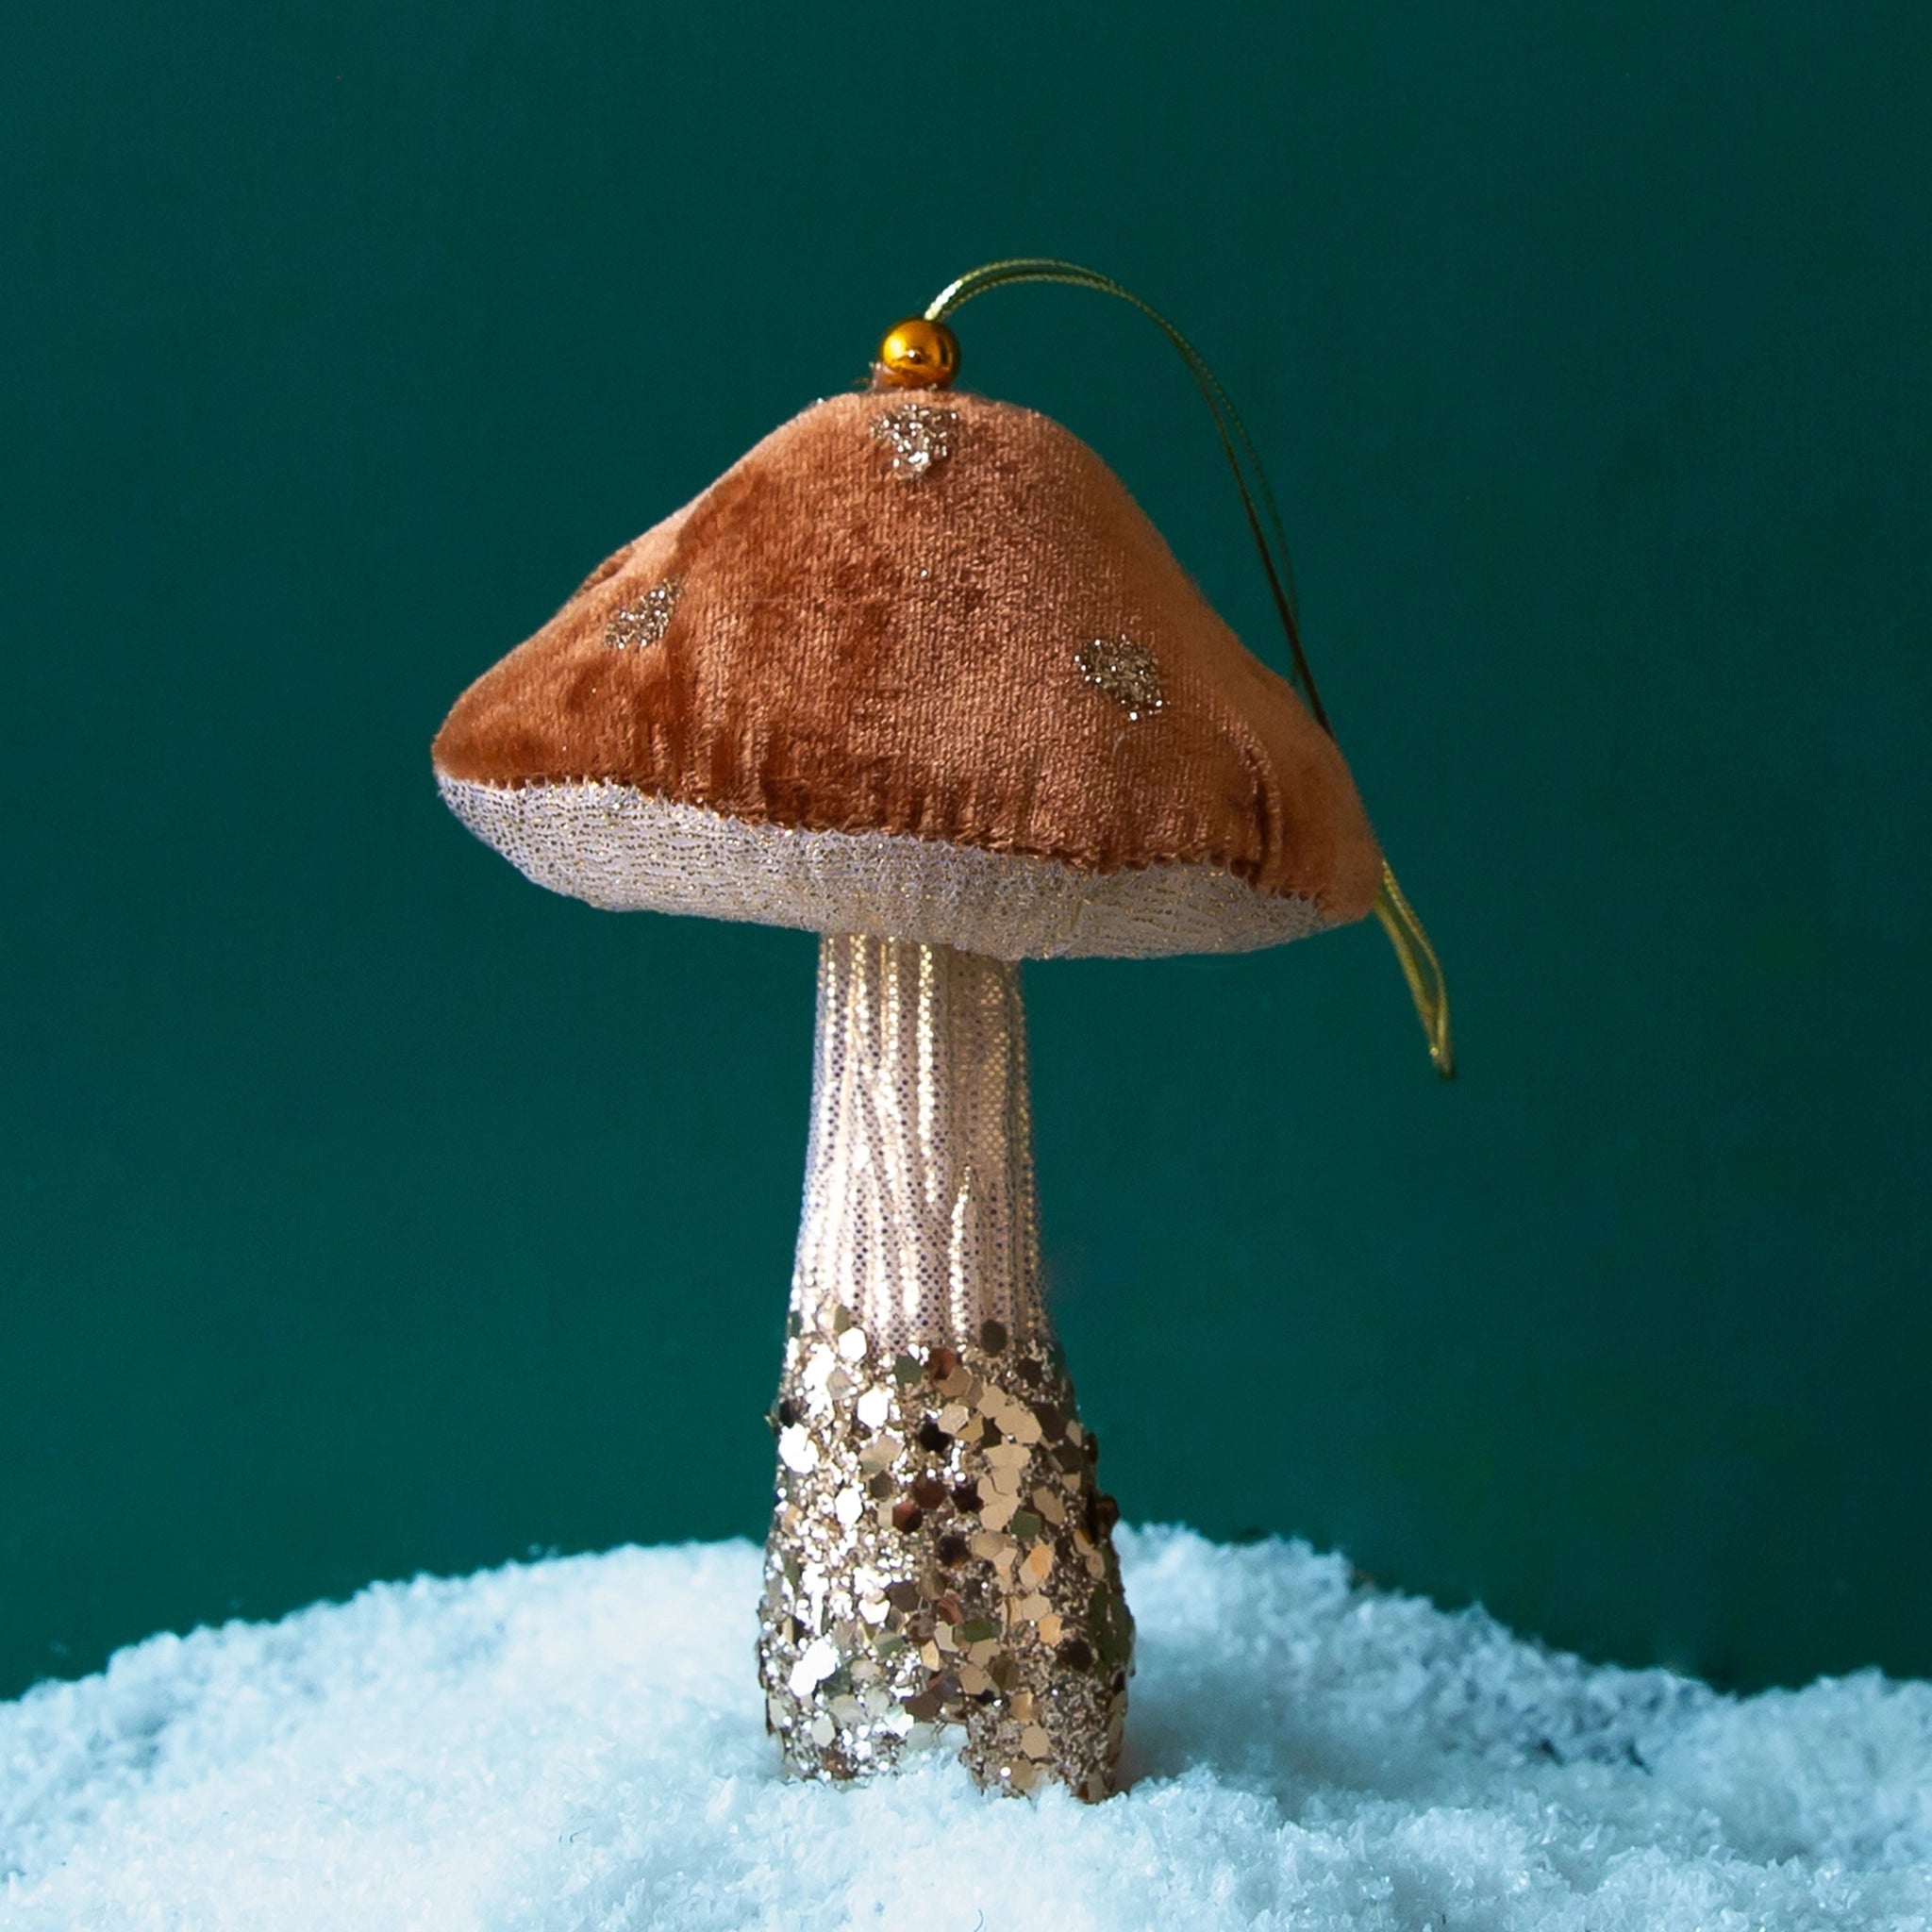 On a green snowy background is a brown and light tan mushroom ornament with gold sparkle details.